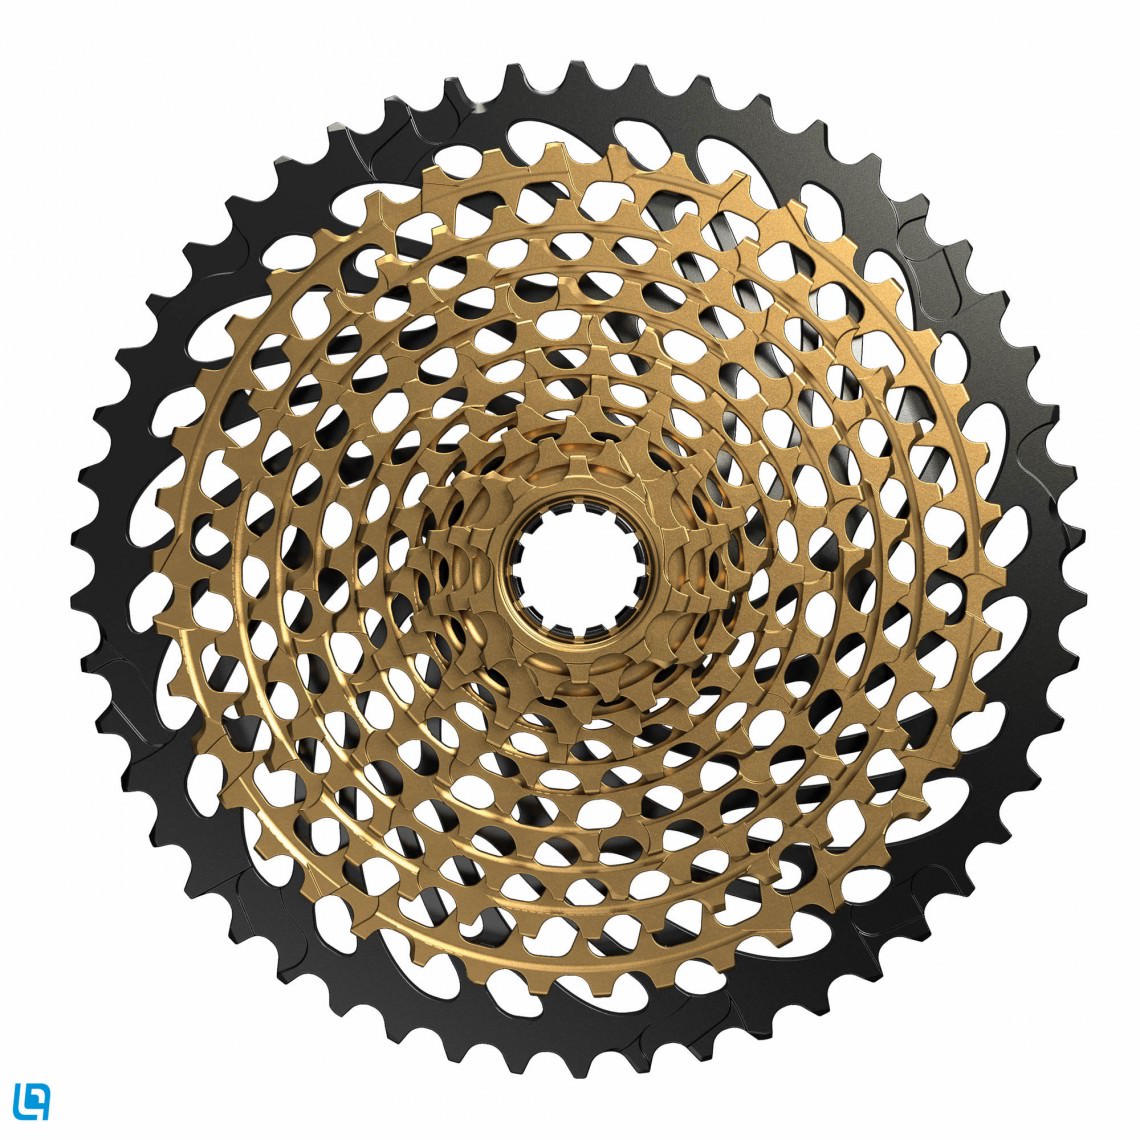 The most distinctive feature of the new drivetrain is the huge 10-50t cassette.